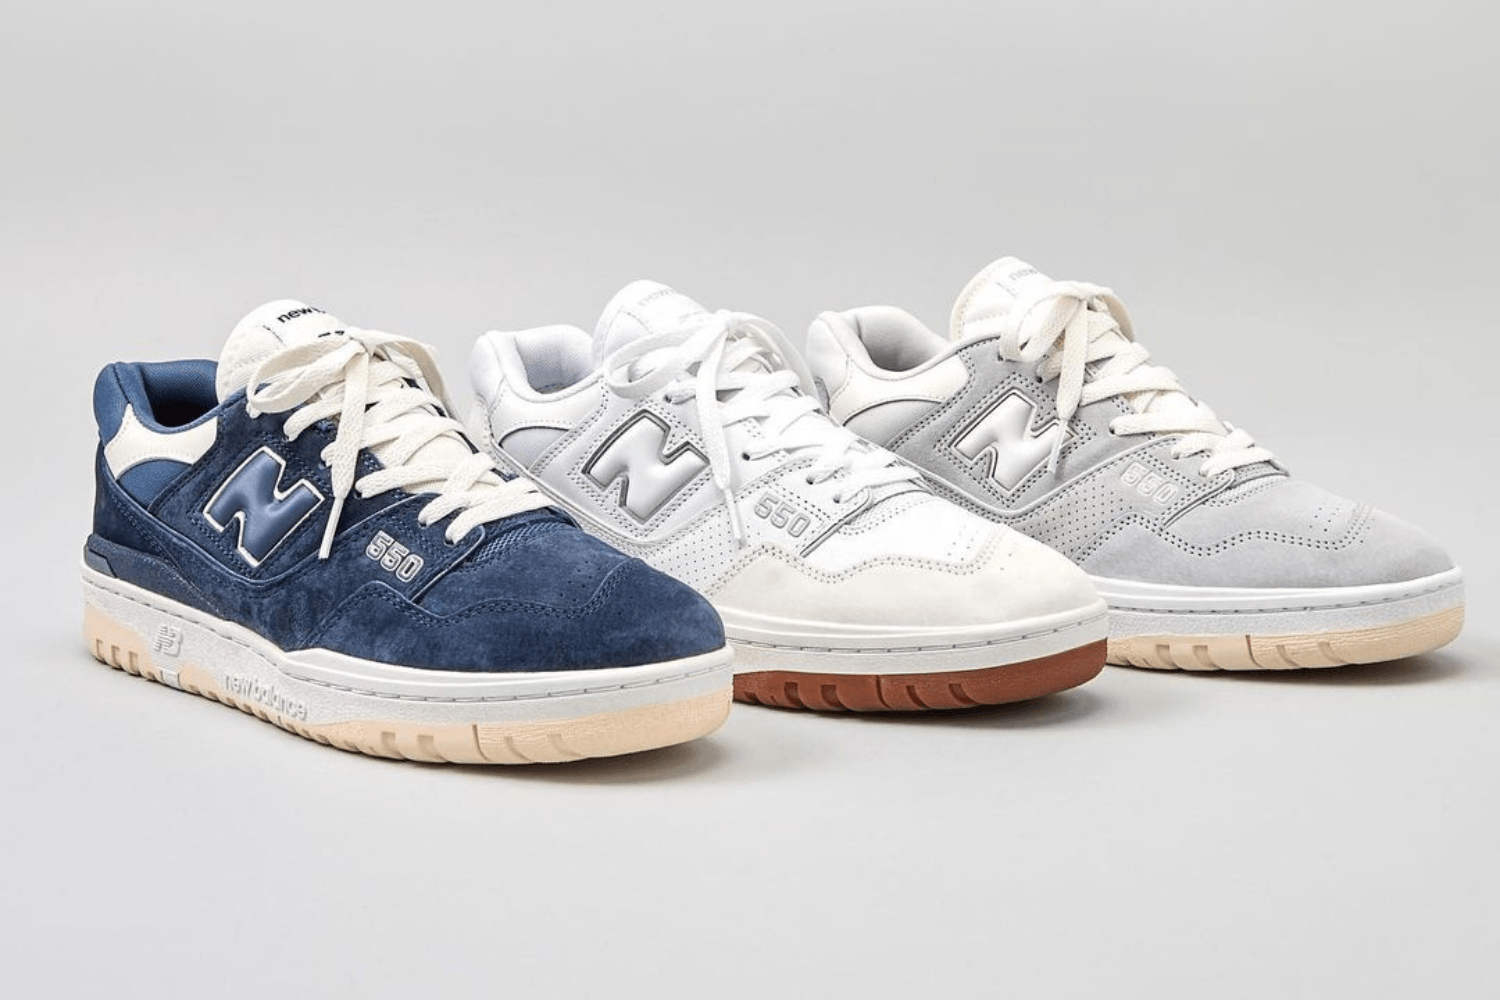 Release Reminder: New Balance 550 Colorways